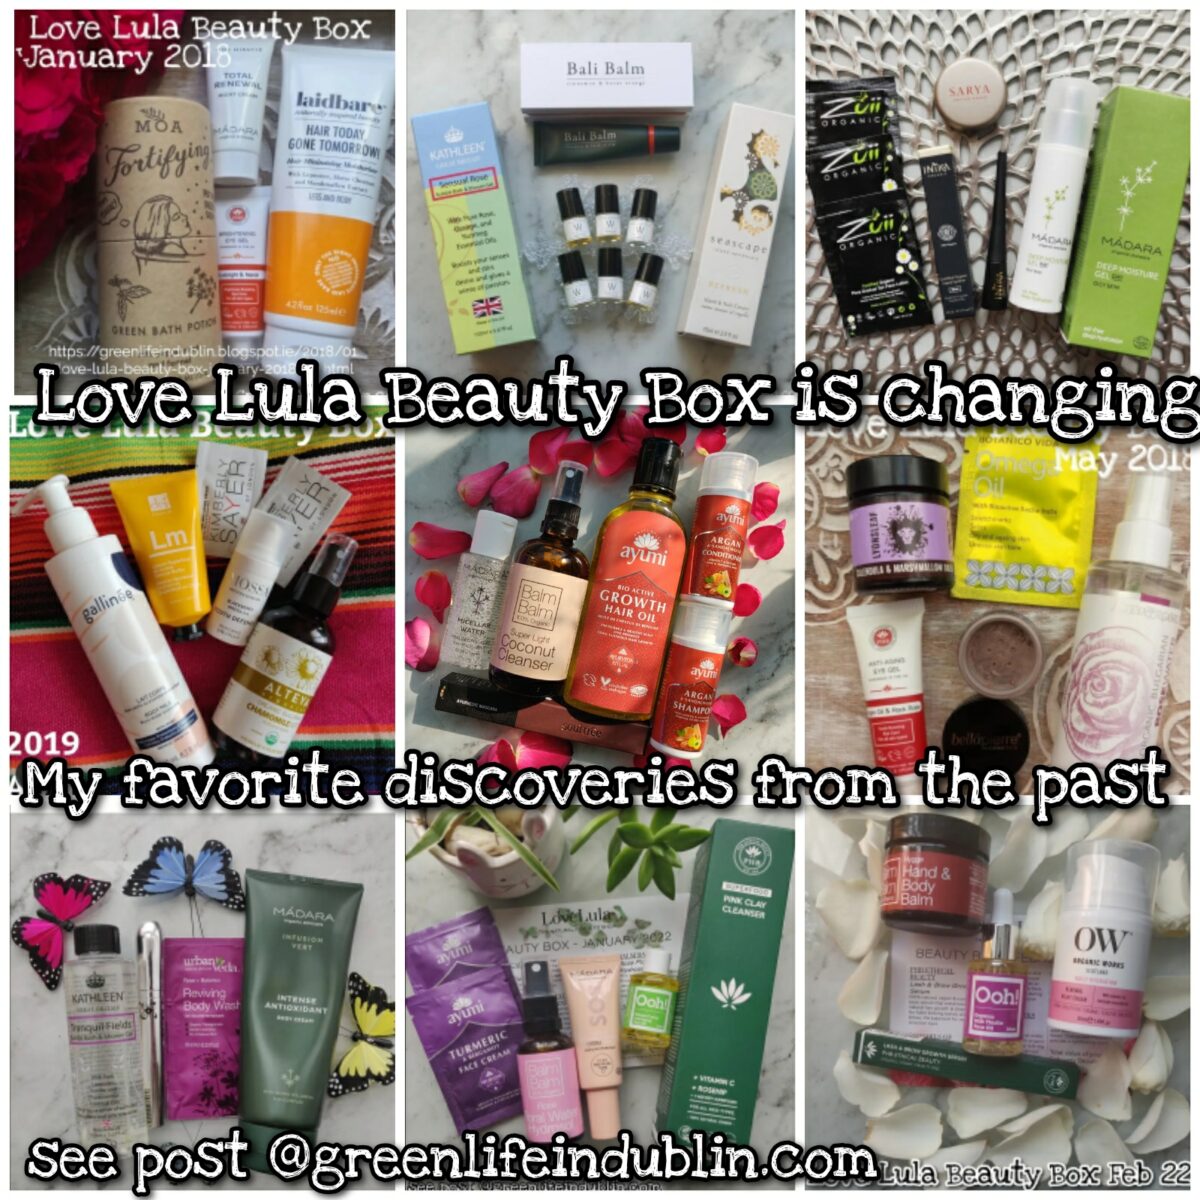 Love Lula Beauty Box is changing & my favourite discoveries from it - Green Life In Dublin